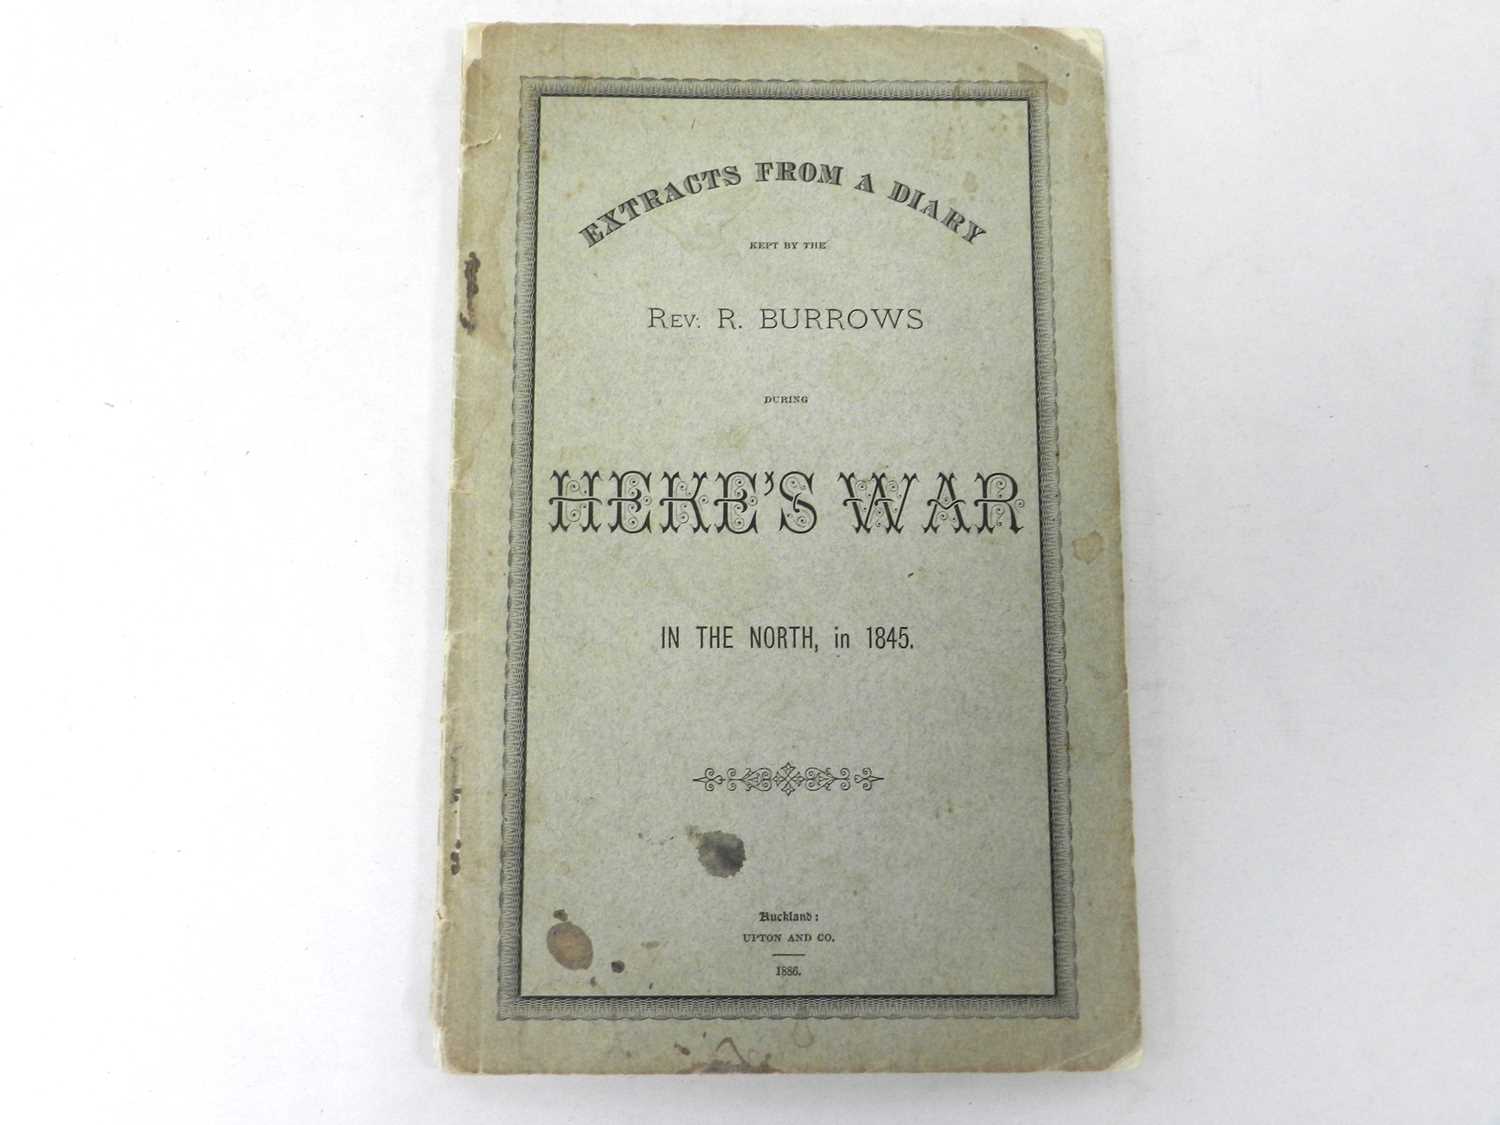 Lot 50 - BURROWS, Rev R, Extracts from a Diary kept by the Rev R Burrows during Heke's War in the North